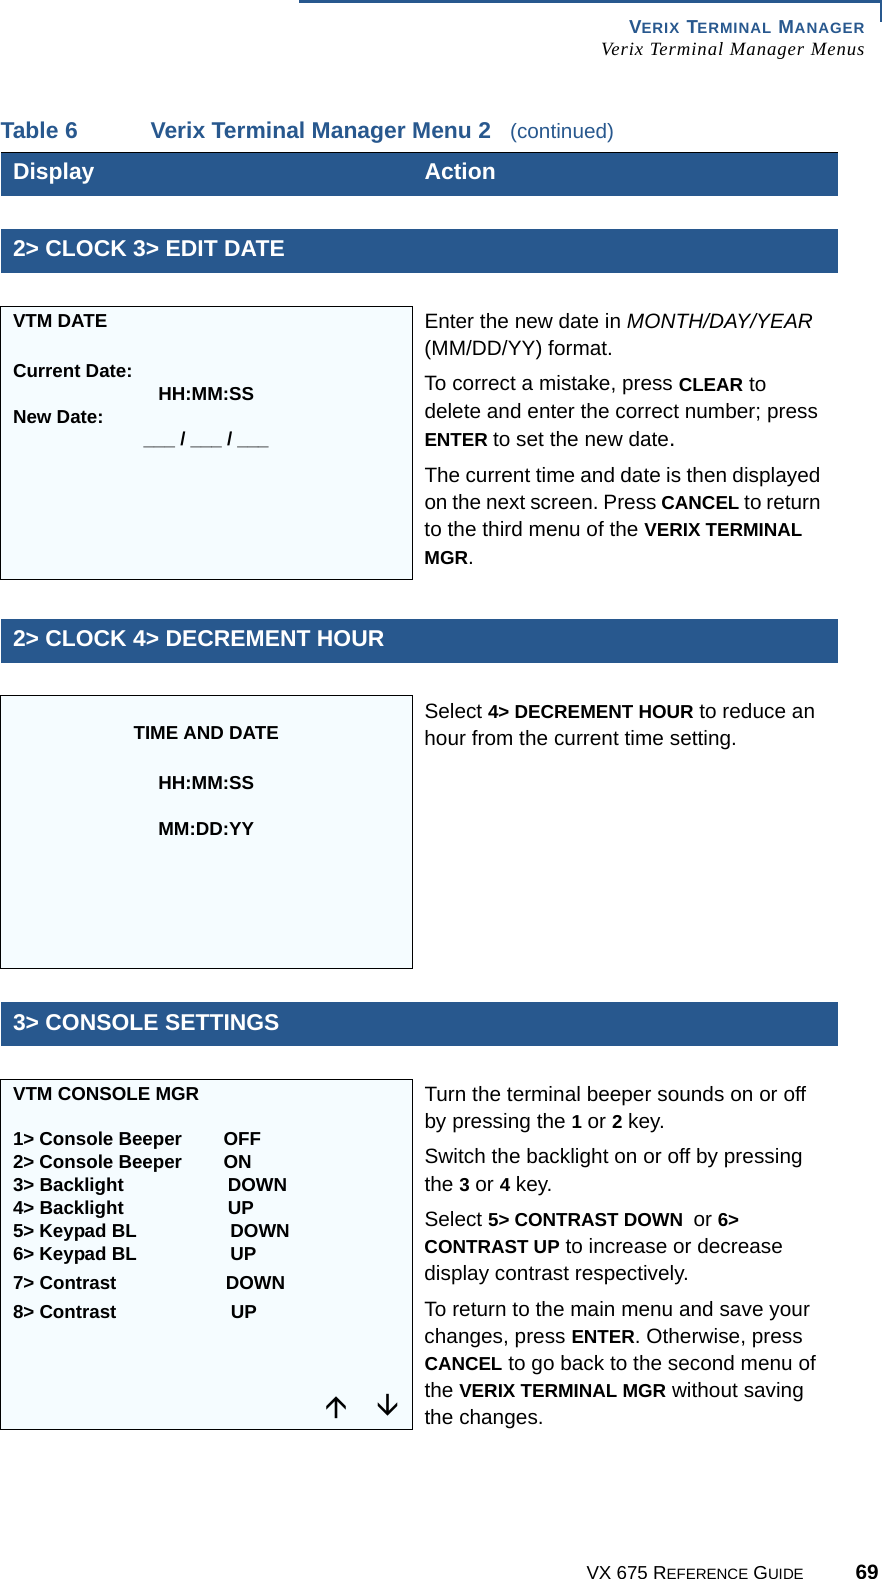 VERIX TERMINAL MANAGERVerix Terminal Manager MenusVX 675 REFERENCE GUIDE 692&gt; CLOCK 3&gt; EDIT DATEVTM DATECurrent Date: HH:MM:SSNew Date: ___ / ___ / ___Enter the new date in MONTH/DAY/YEAR (MM/DD/YY) format.To correct a mistake, press CLEAR to delete and enter the correct number; press ENTER to set the new date.The current time and date is then displayed on the next screen. Press CANCEL to return to the third menu of the VERIX TERMINAL MGR.2&gt; CLOCK 4&gt; DECREMENT HOURTIME AND DATEHH:MM:SSMM:DD:YYSelect 4&gt; DECREMENT HOUR to reduce an hour from the current time setting.3&gt; CONSOLE SETTINGSVTM CONSOLE MGR1&gt; Console Beeper  OFF2&gt; Console Beeper  ON3&gt; Backlight  DOWN4&gt; Backlight  UP5&gt; Keypad BL   DOWN6&gt; Keypad BL   UP7&gt; Contrast  DOWN8&gt; Contrast UPTurn the terminal beeper sounds on or off by pressing the 1 or 2 key.Switch the backlight on or off by pressing the 3 or 4 key.Select 5&gt; CONTRAST DOWN  or 6&gt; CONTRAST UP to increase or decrease display contrast respectively.To return to the main menu and save your changes, press ENTER. Otherwise, press CANCEL to go back to the second menu of the VERIX TERMINAL MGR without saving the changes.Table 6 Verix Terminal Manager Menu 2   (continued)Display  Action